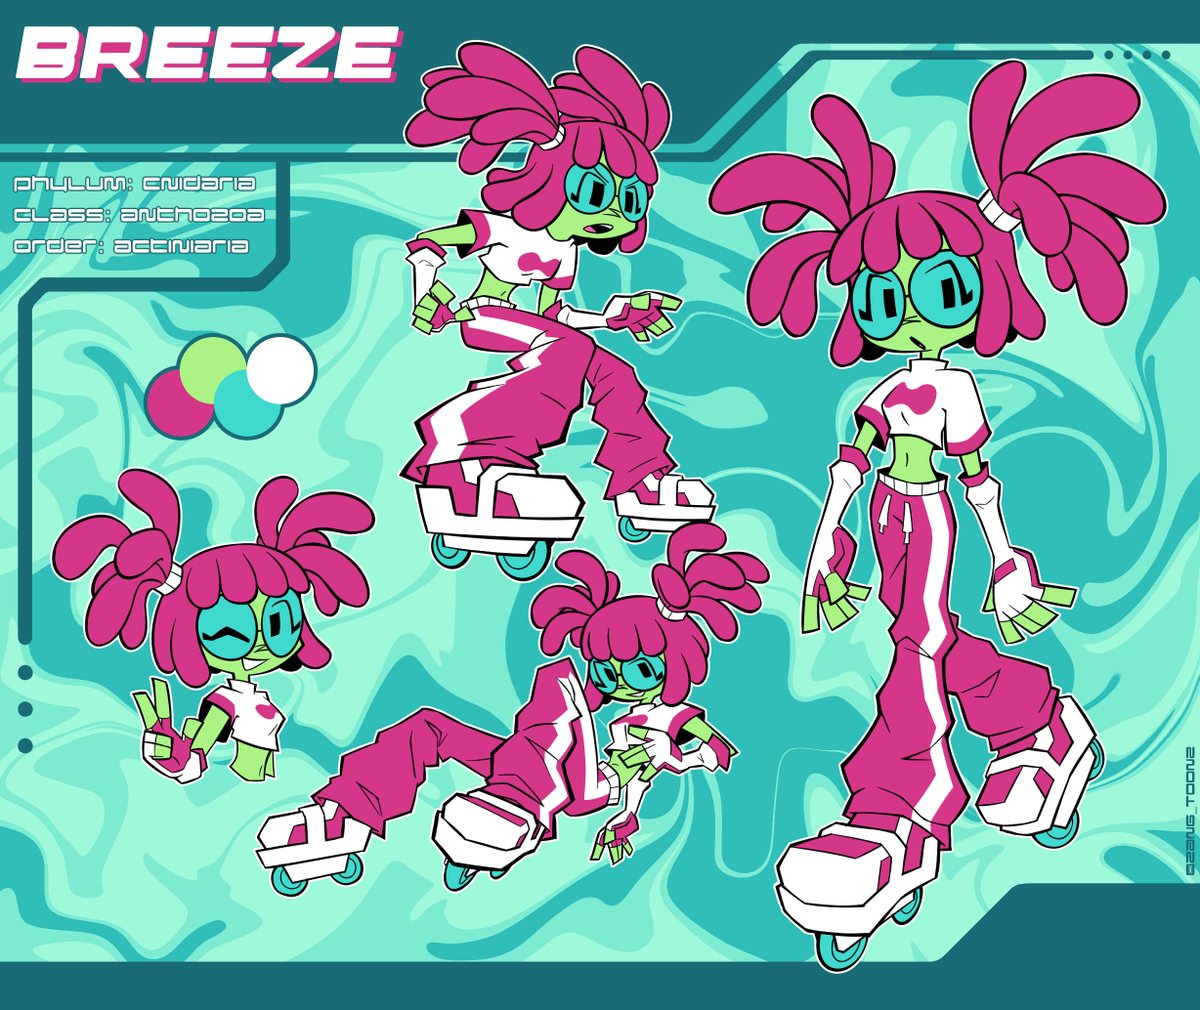 went back on breeze's ref and did a minor tweak, thinkin she'd look better without the outlines in her glasses